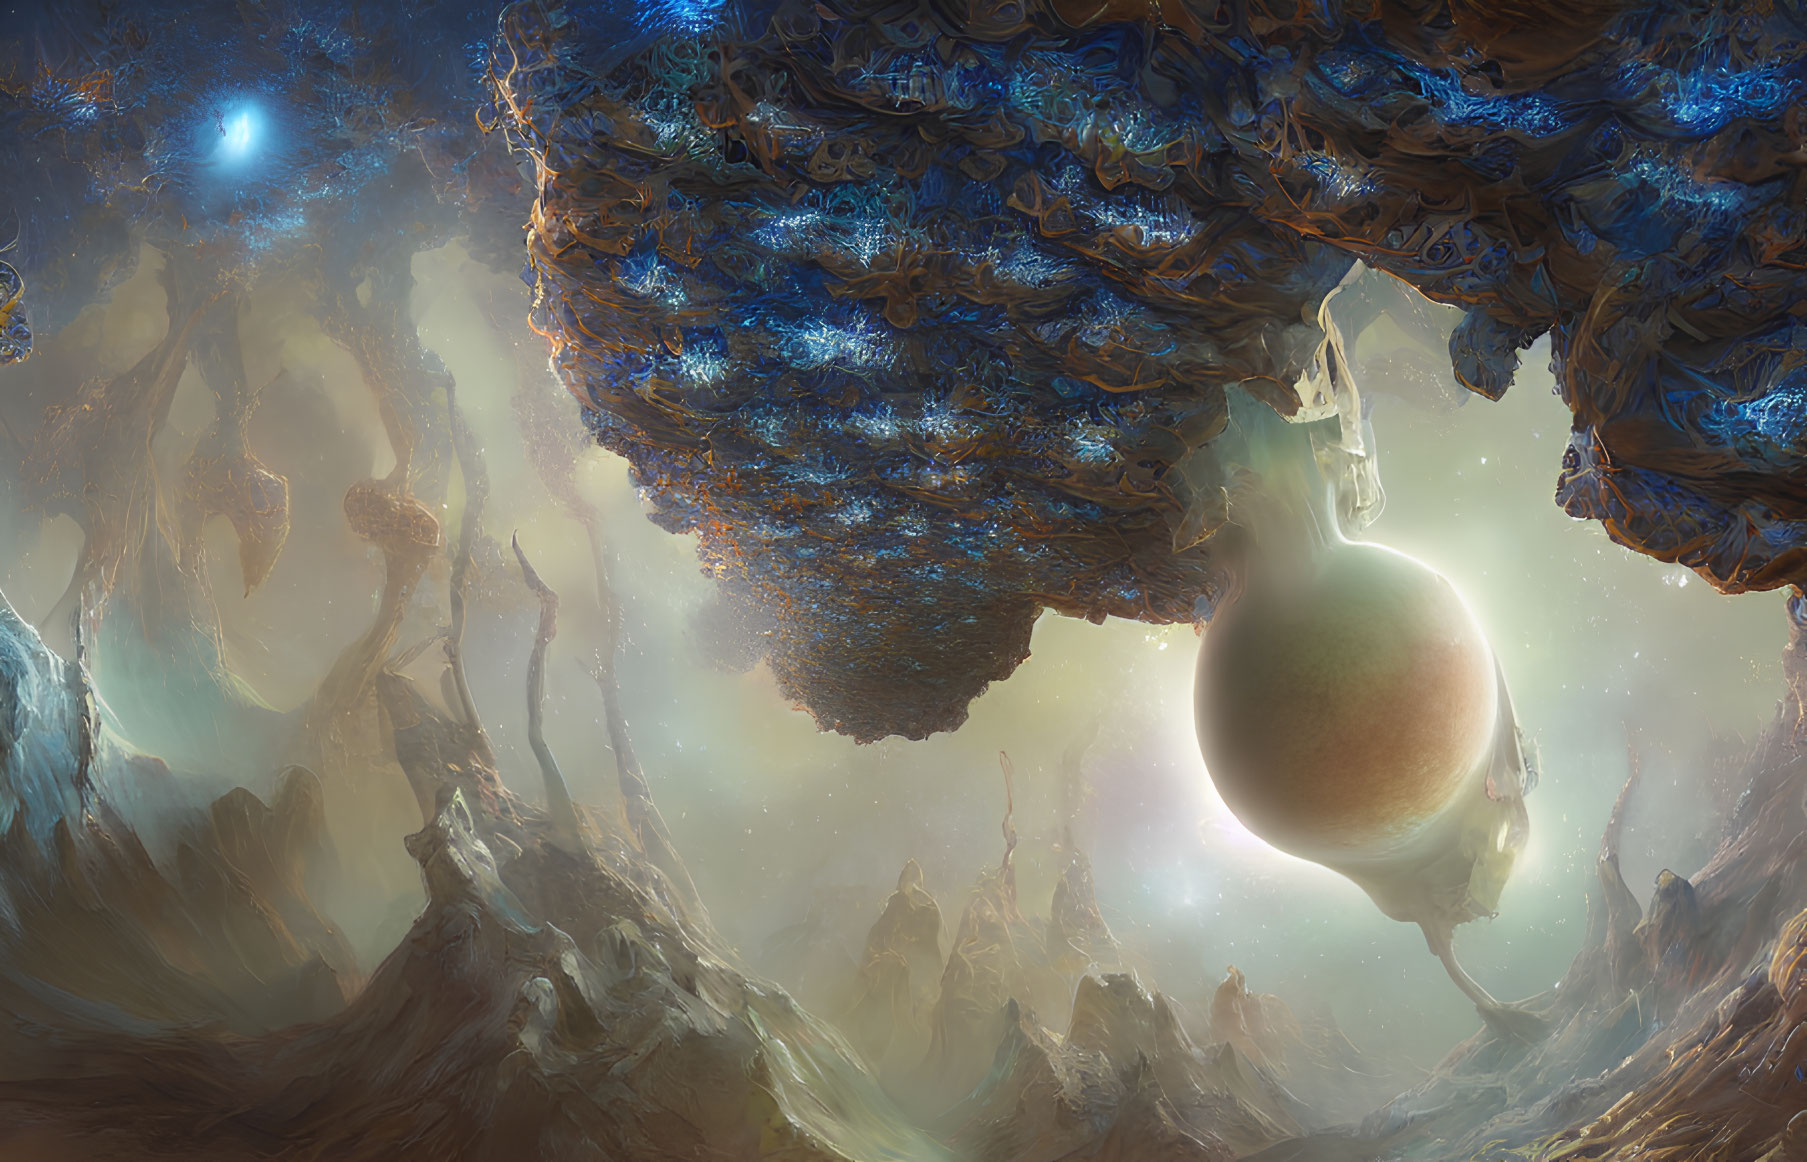 Surreal landscape with floating structures and levitating egg-shaped object under cosmic sky